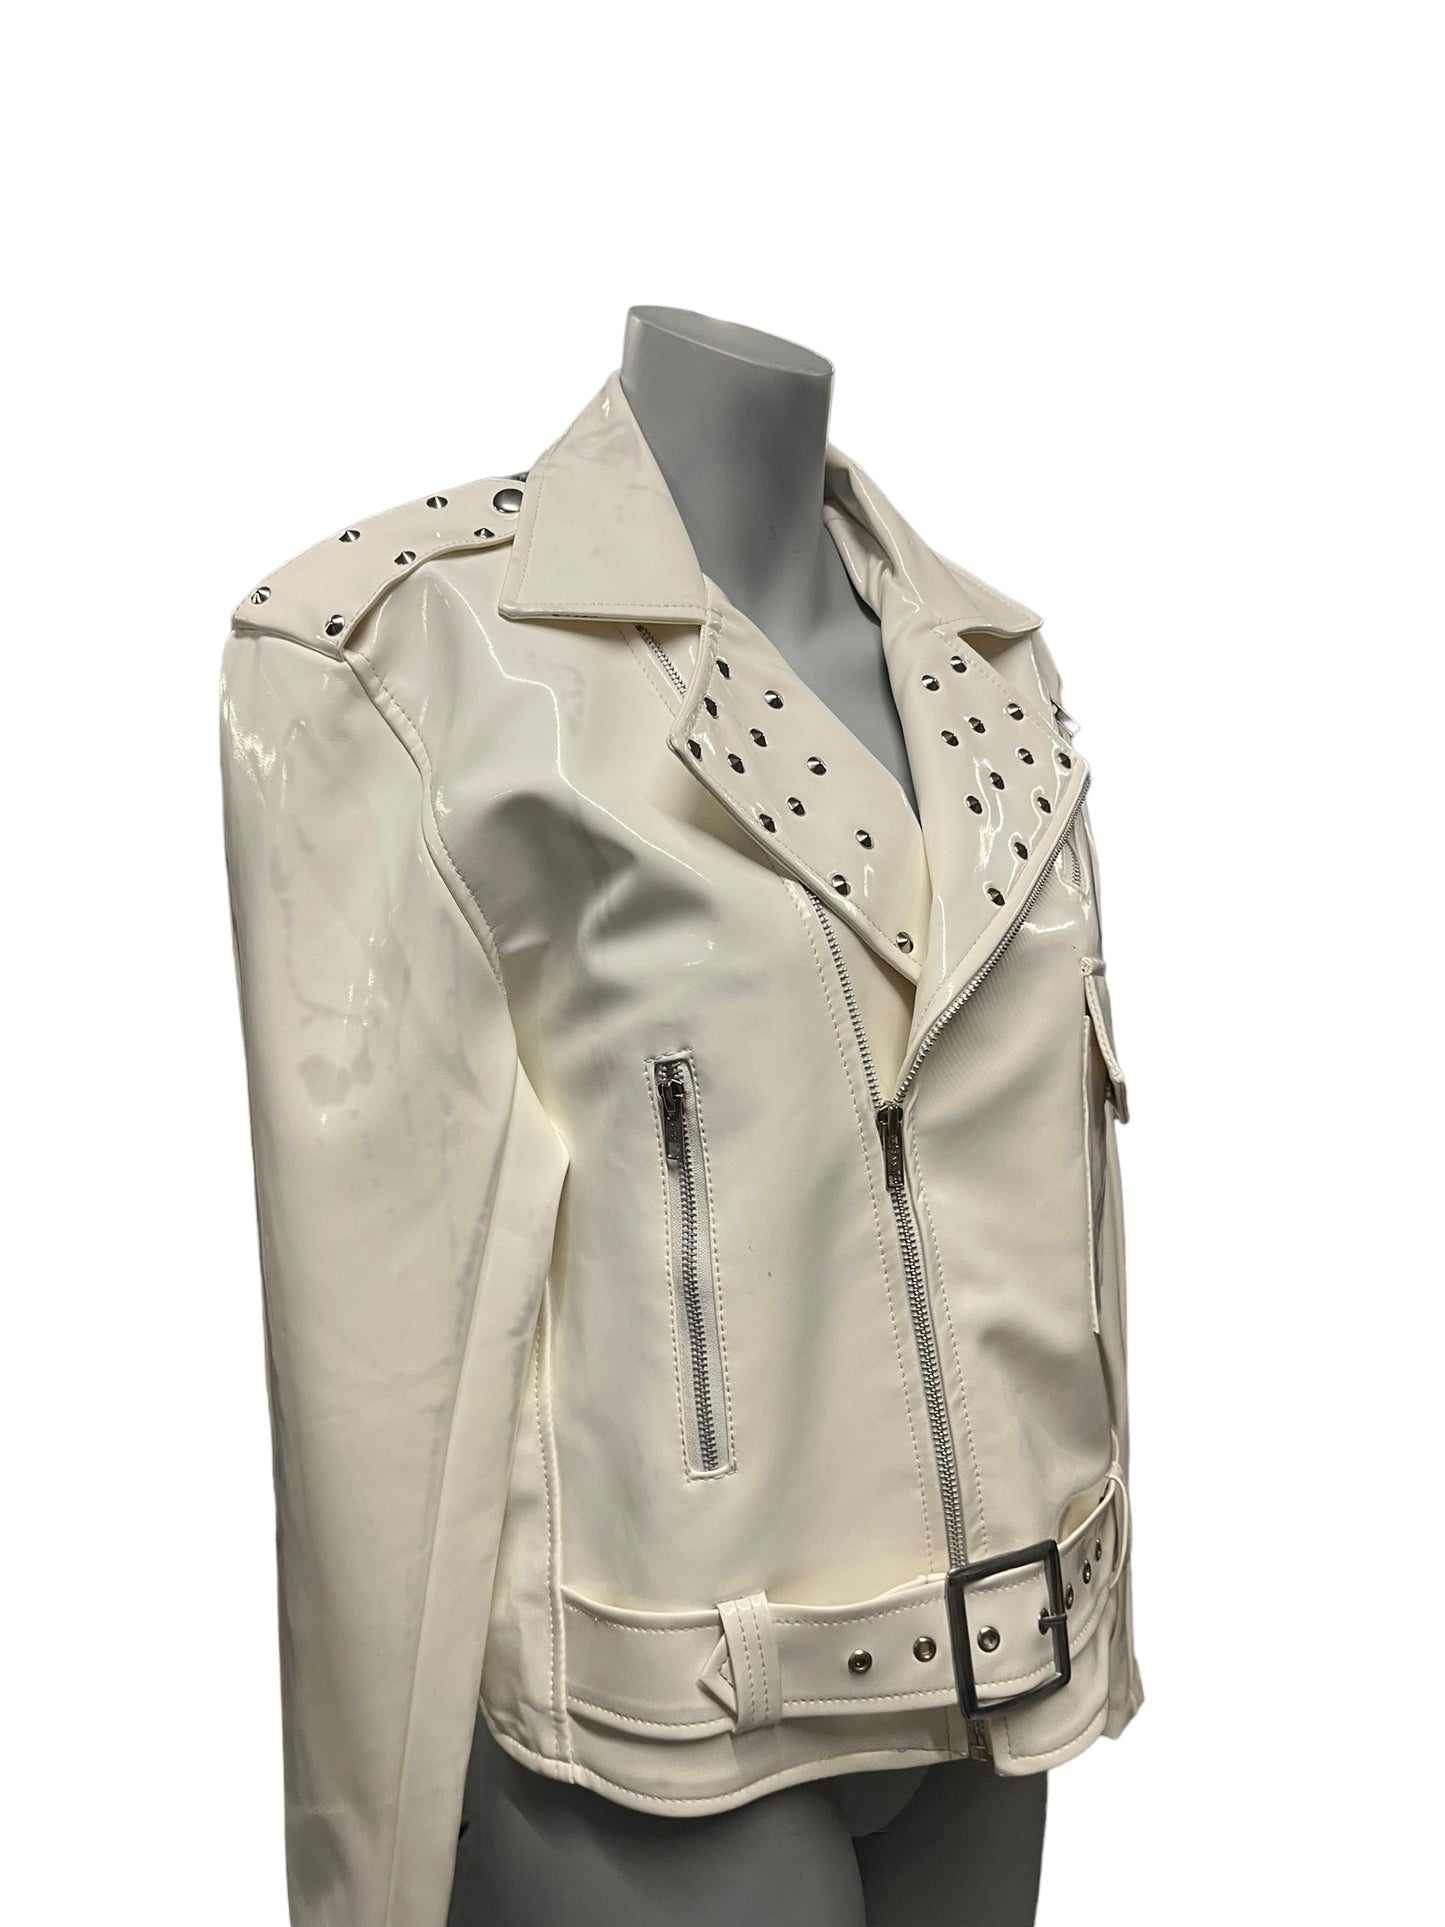 Fashion World - LL122 - White Jacket with Studs and Erotic Stains - Size M